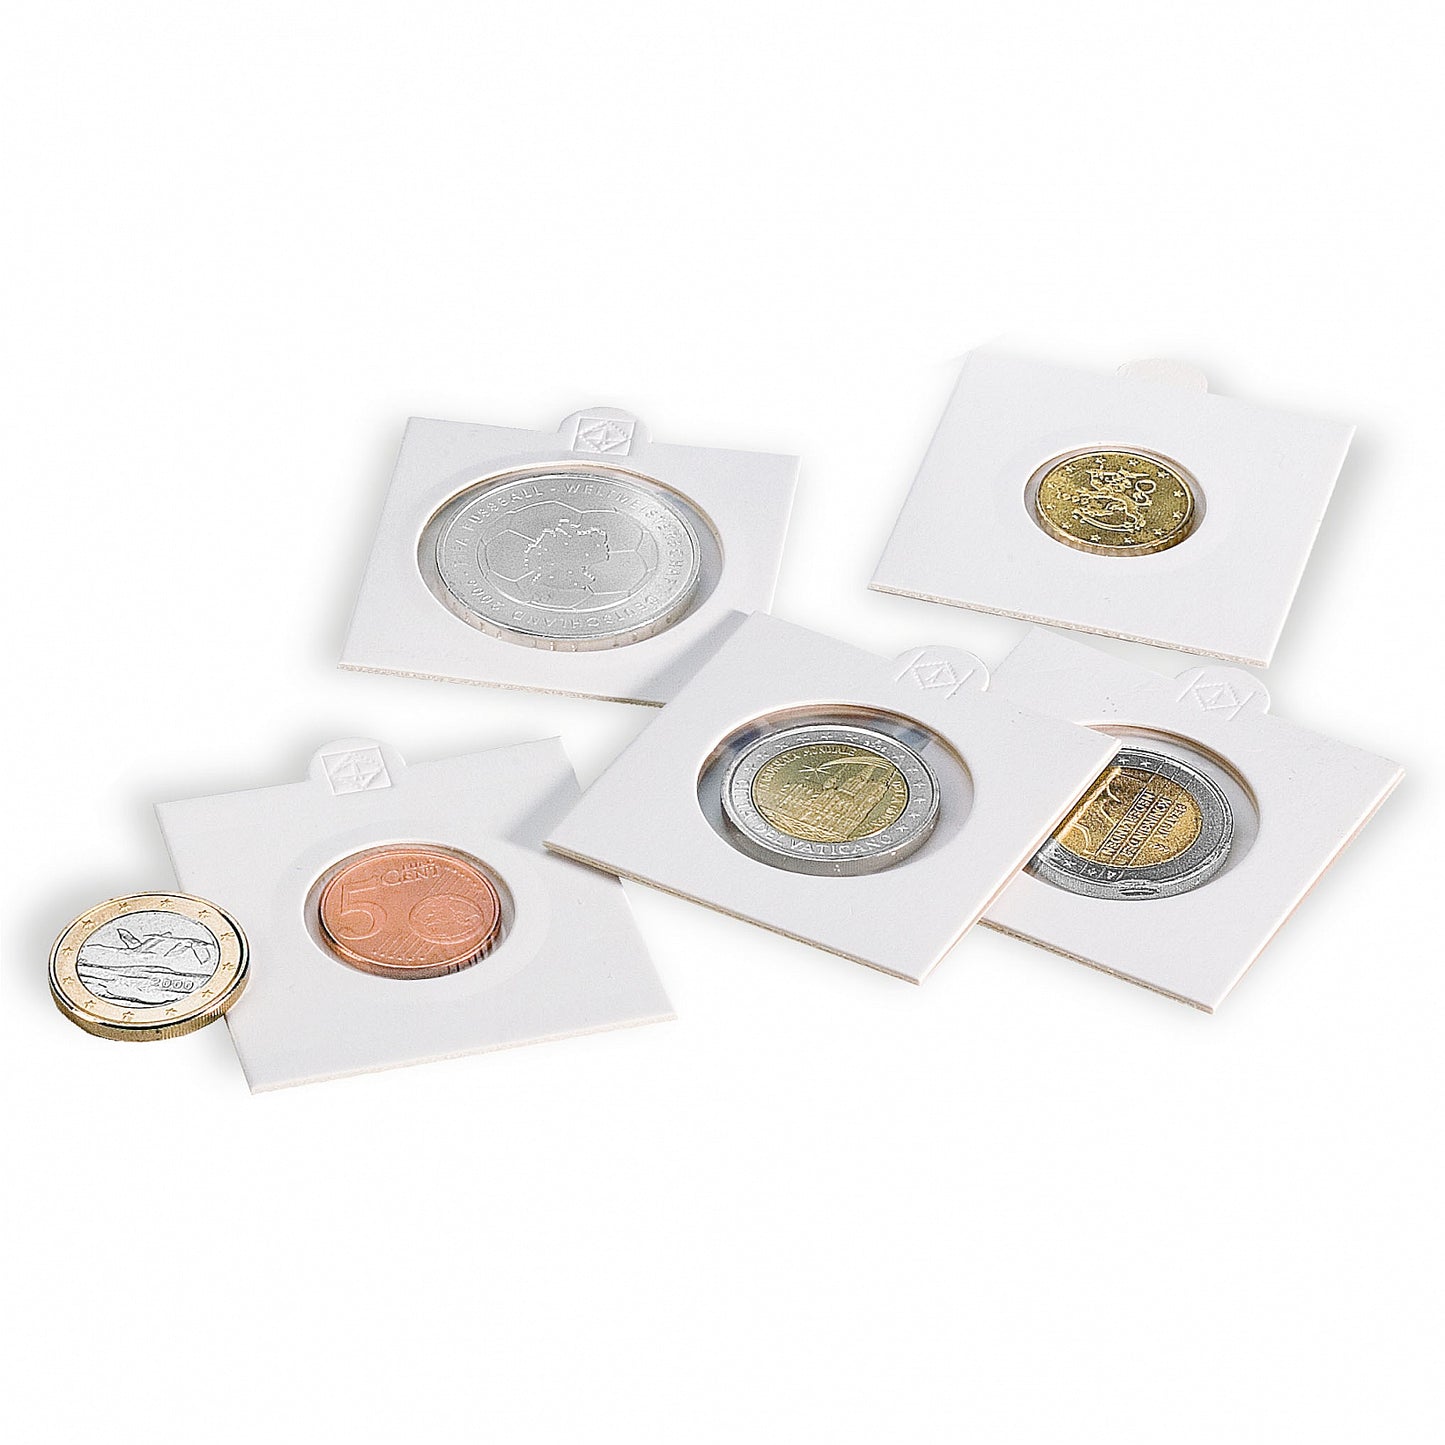 Self-Adhesive Coin Holders